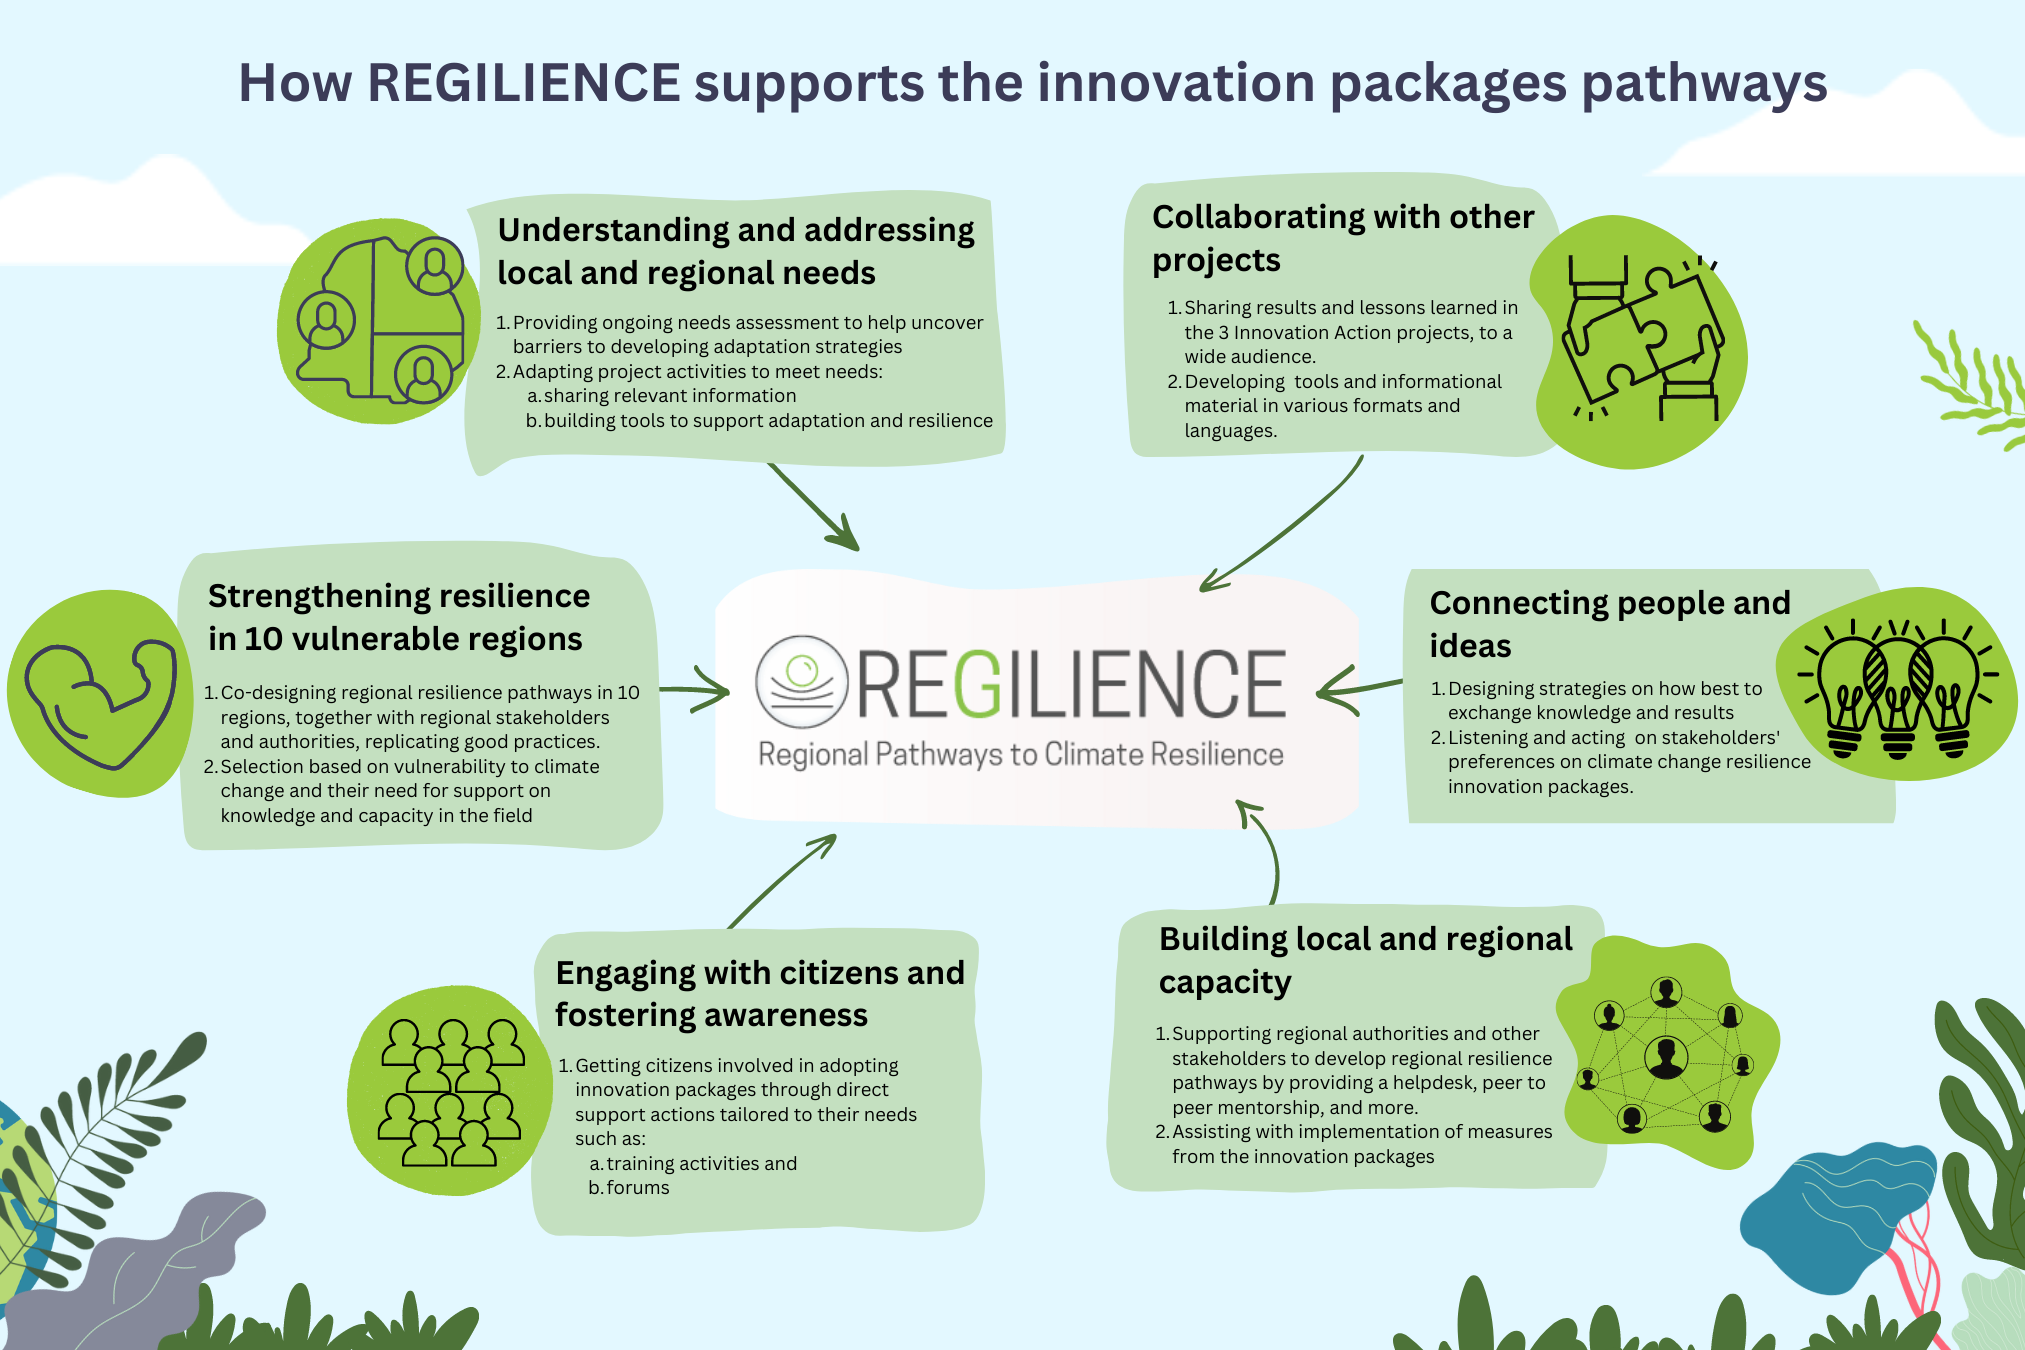 REGILIENCE's communication aims to support innovation